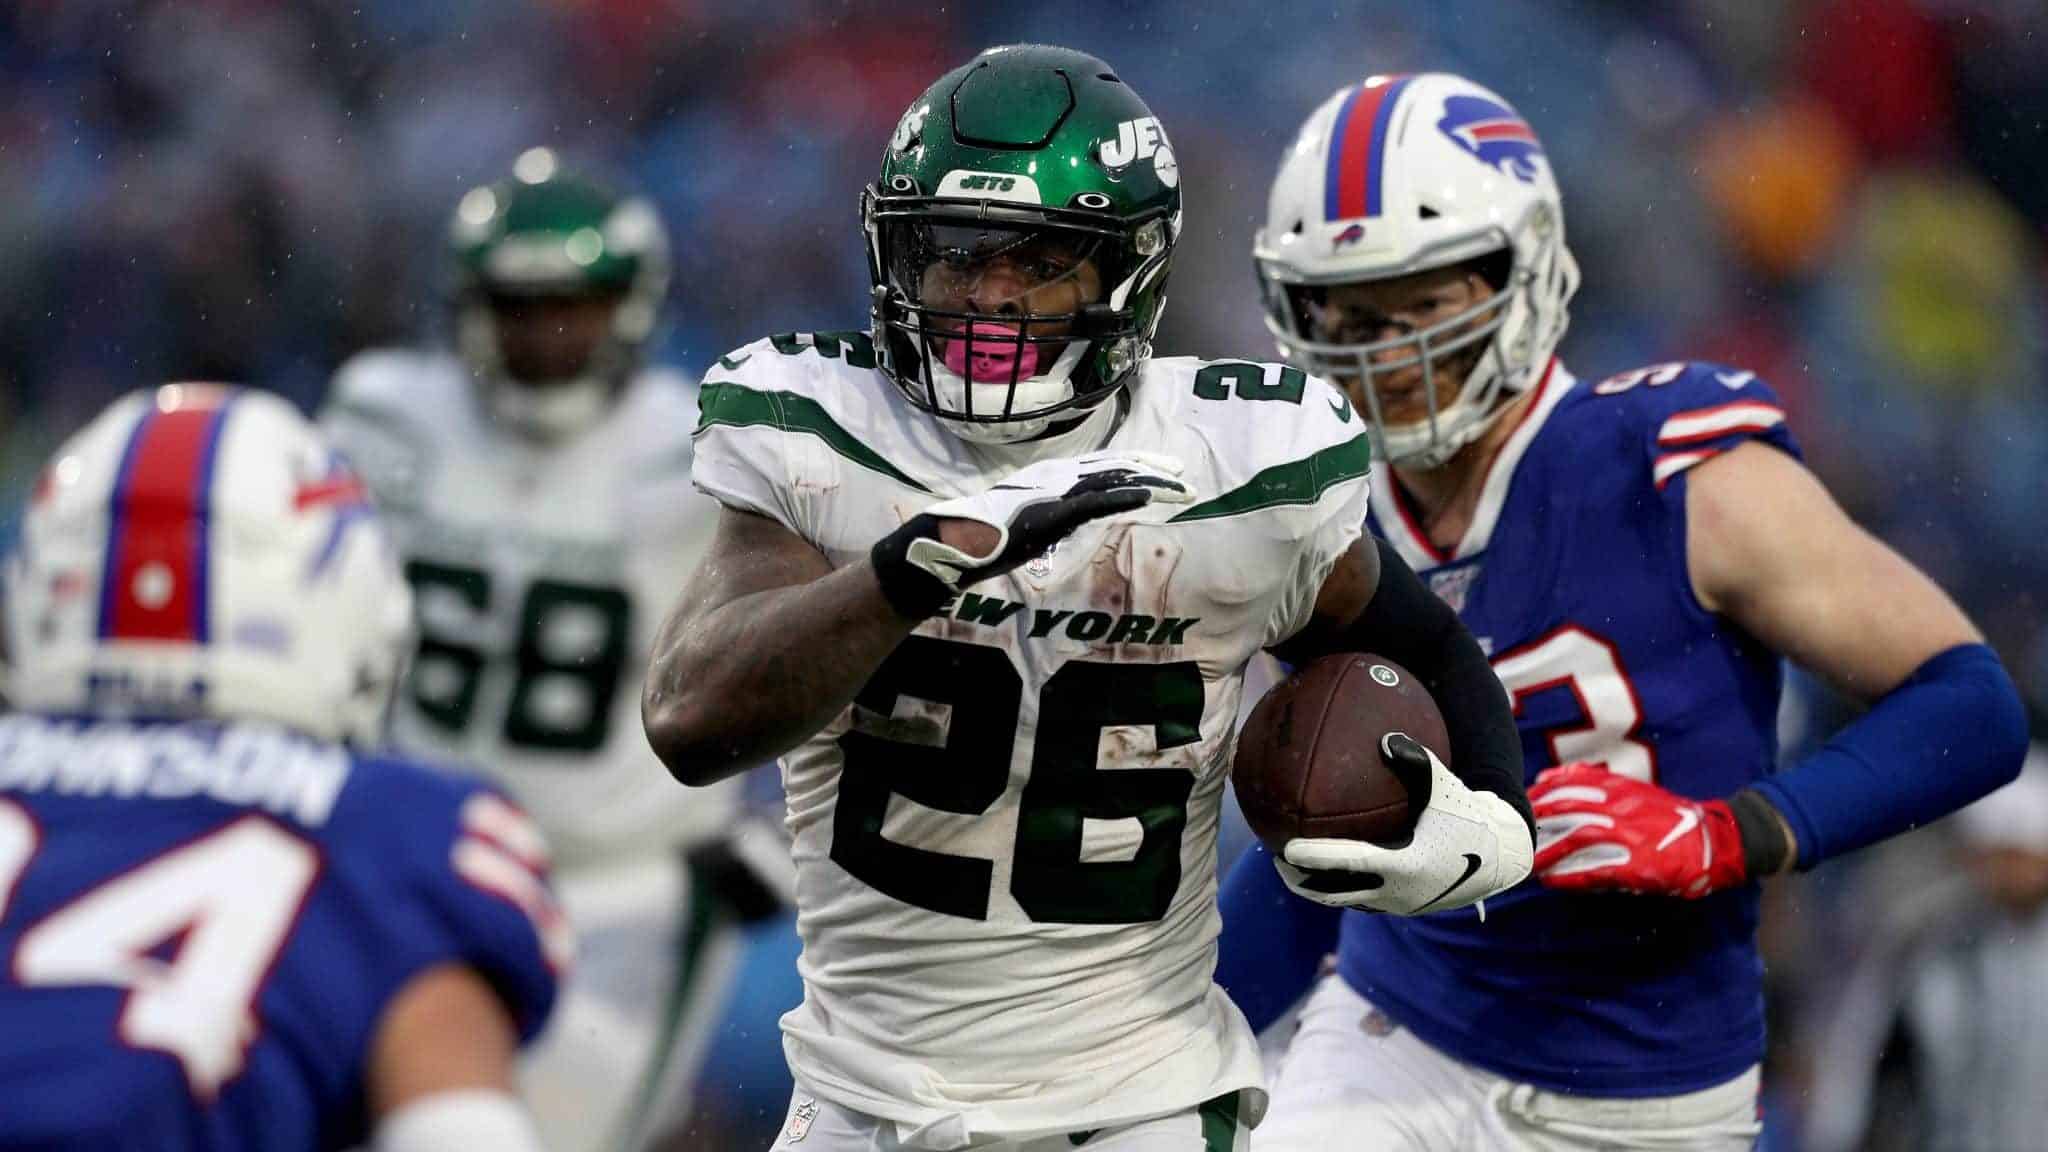 ORCHARD PARK, NEW YORK - DECEMBER 29: Le'Veon Bell #26 of the New York Jets runs the ball during the fourth quarter of an NFL game against the Buffalo Bills at New Era Field on December 29, 2019 in Orchard Park, New York.